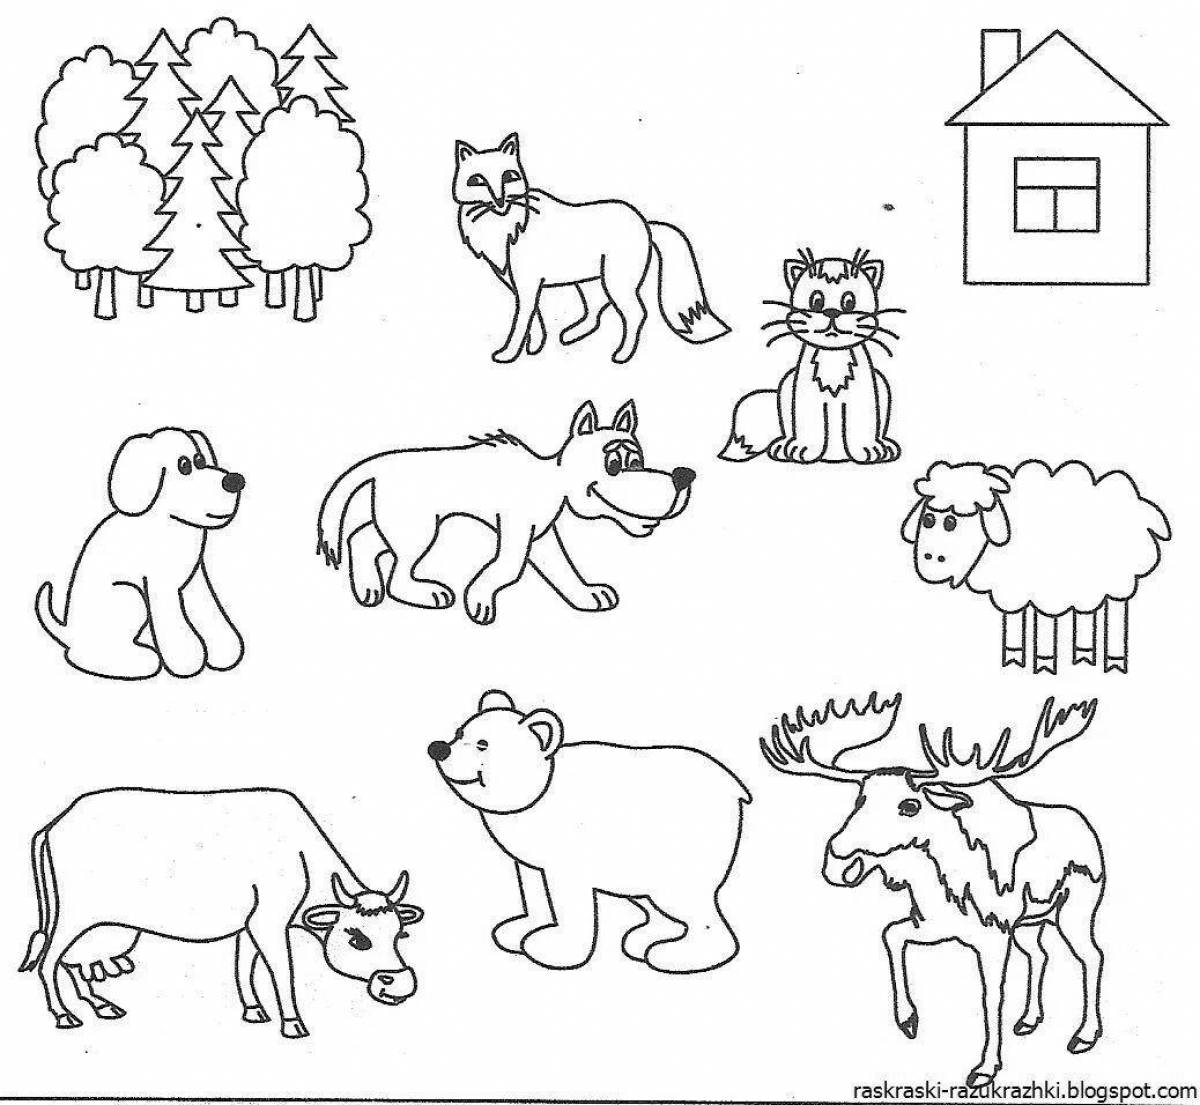 Fun coloring pages for pets for 5-6 year olds